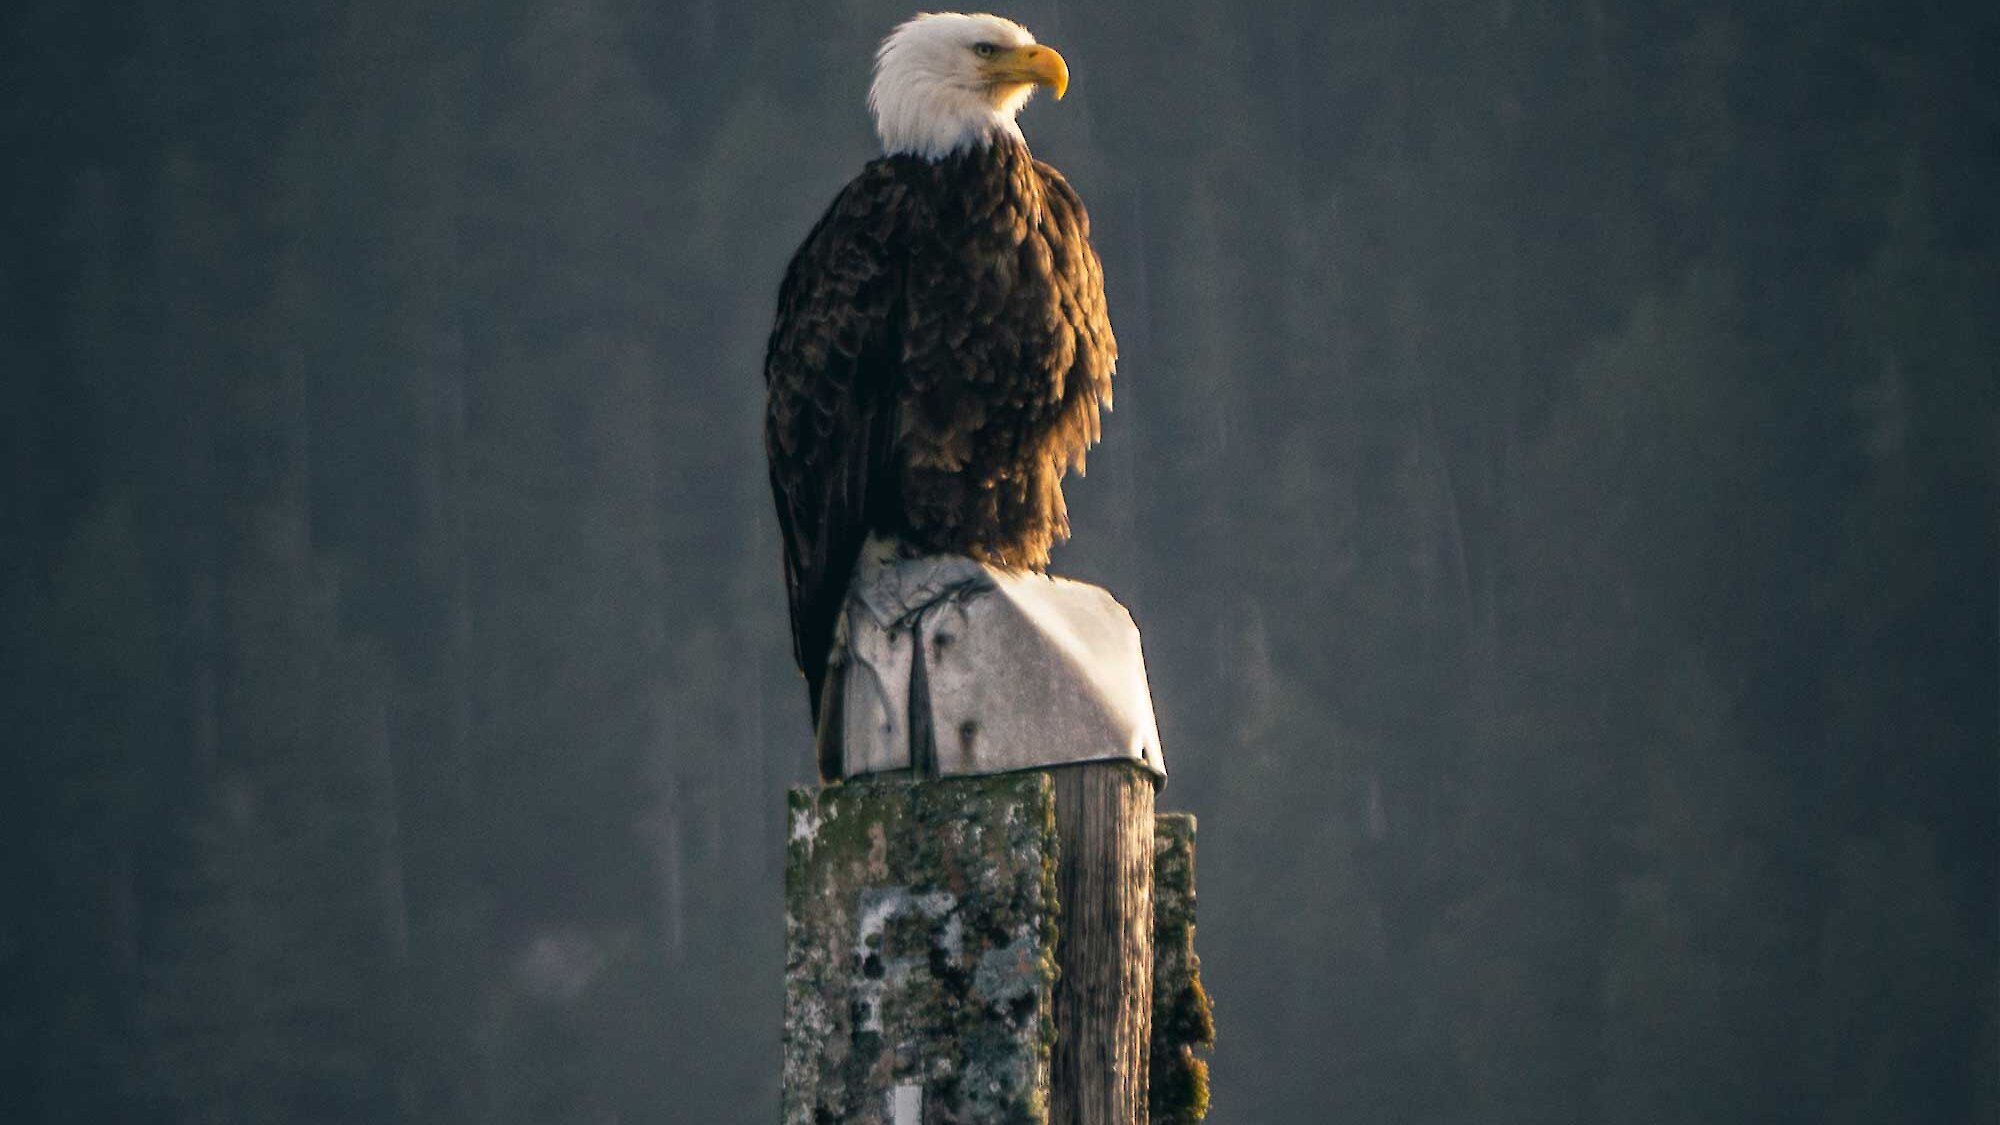 Bald eagle perched over looking the water with a blurred background of pine trees.